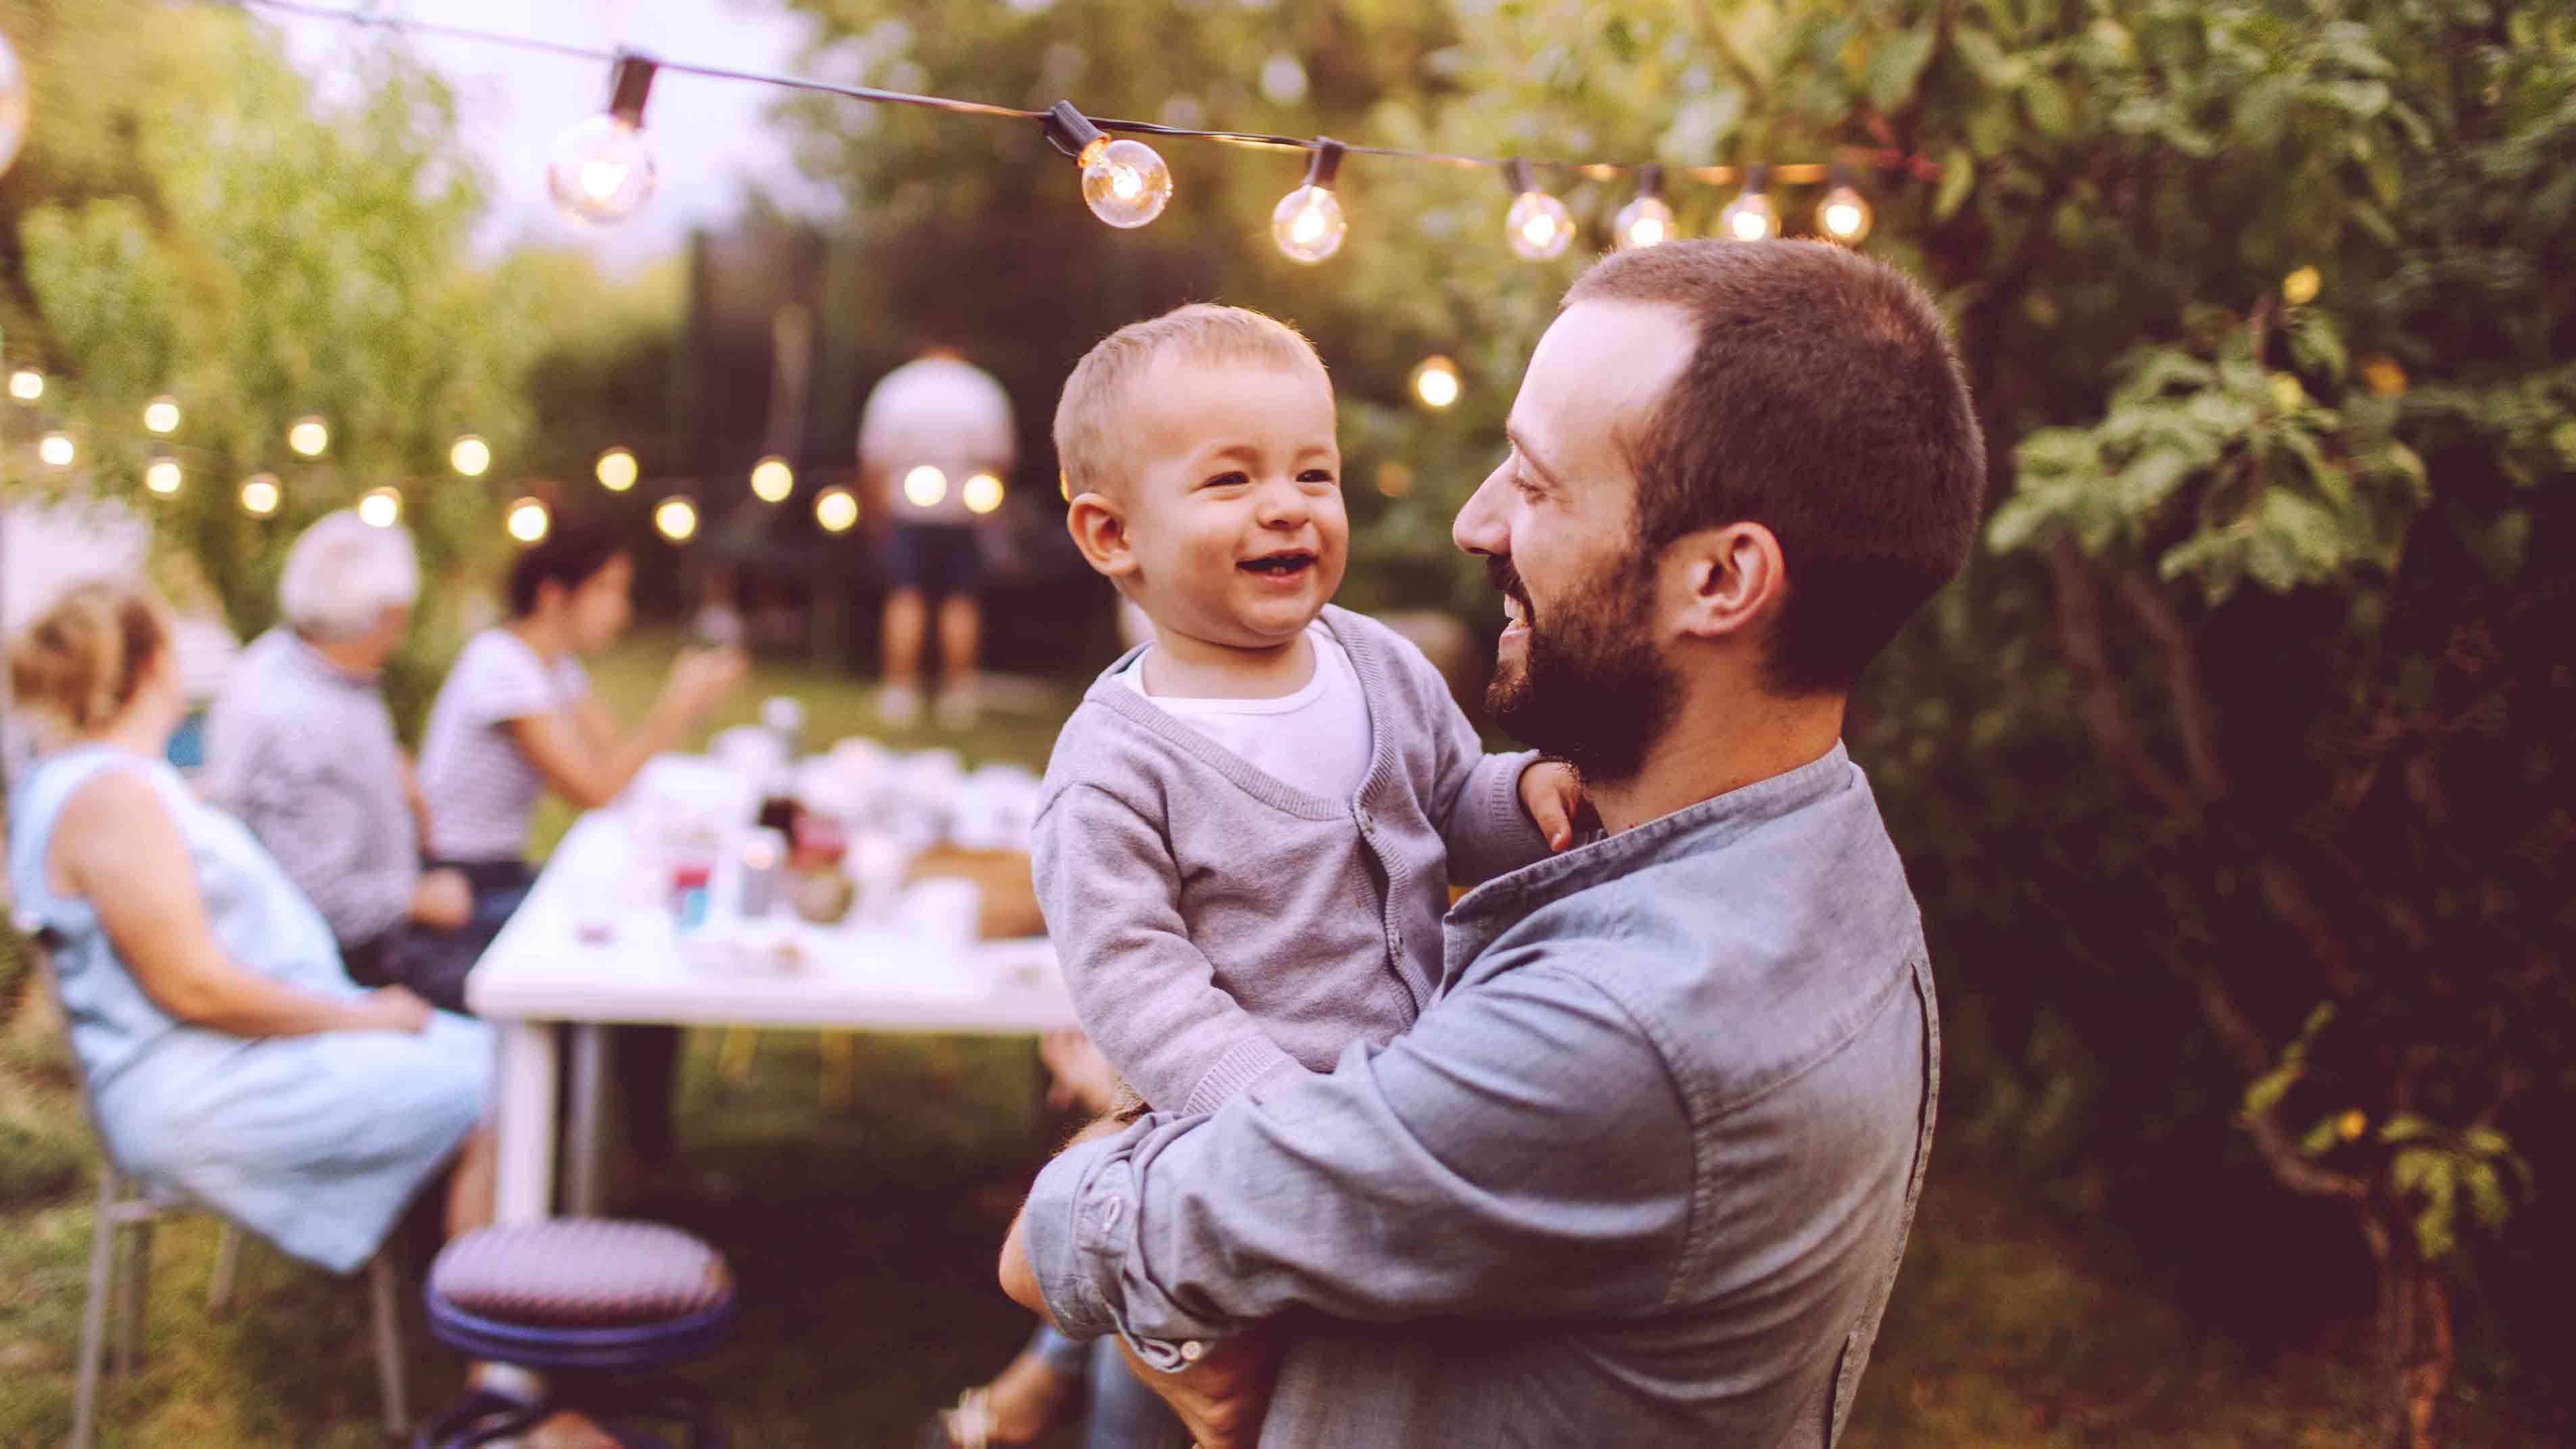 Man holding smiling baby in a garden